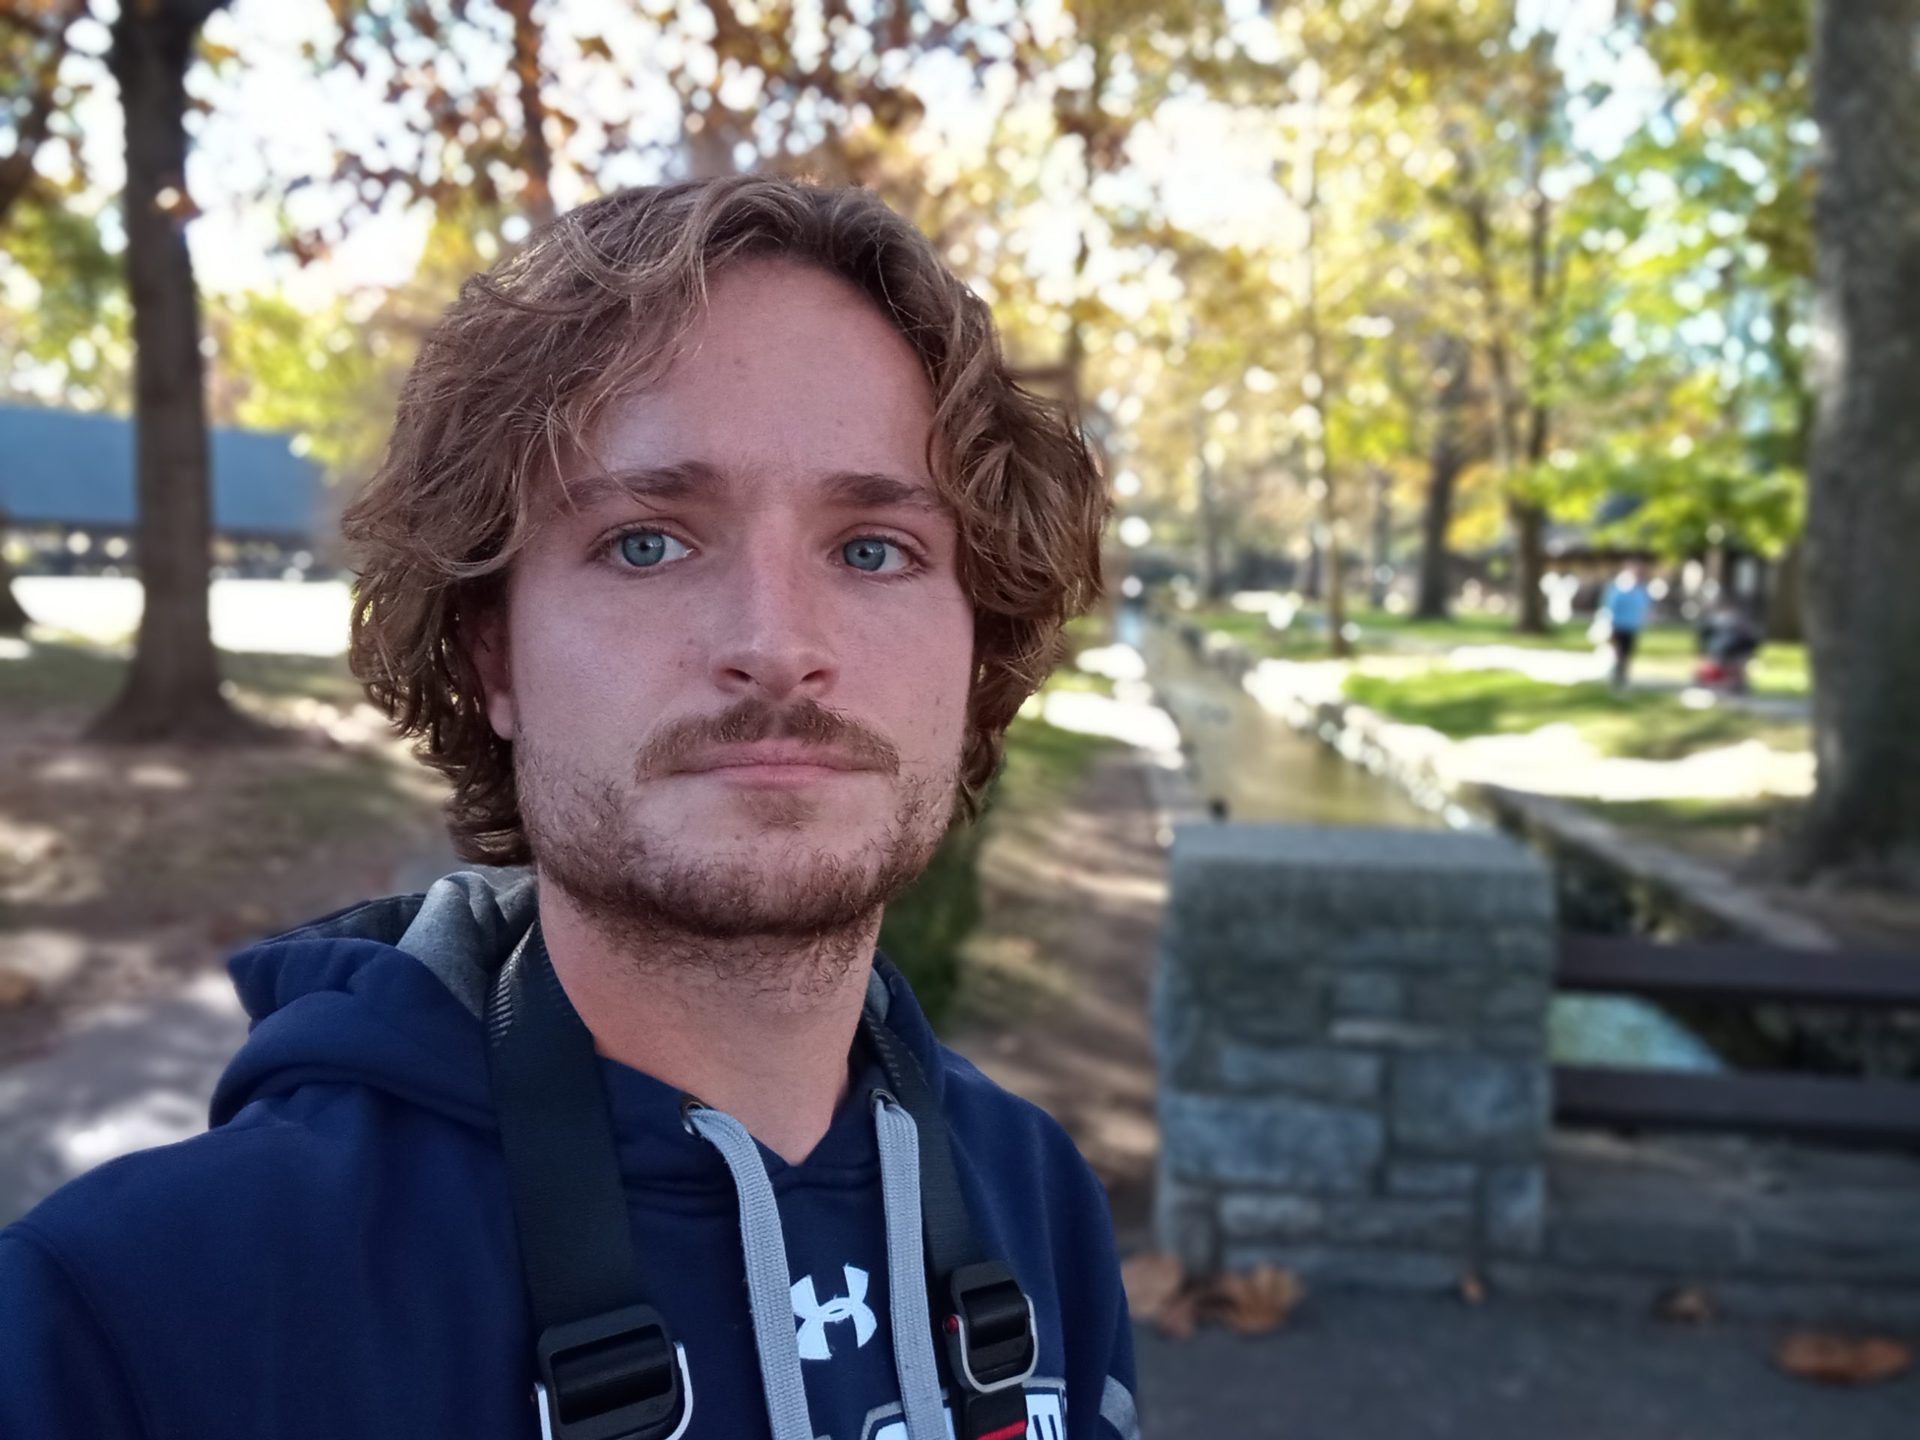 moto g pure portrait selfie of a man with light curly hair and facial hair, wearing a t-shirt and hoodie, with trees behind him.